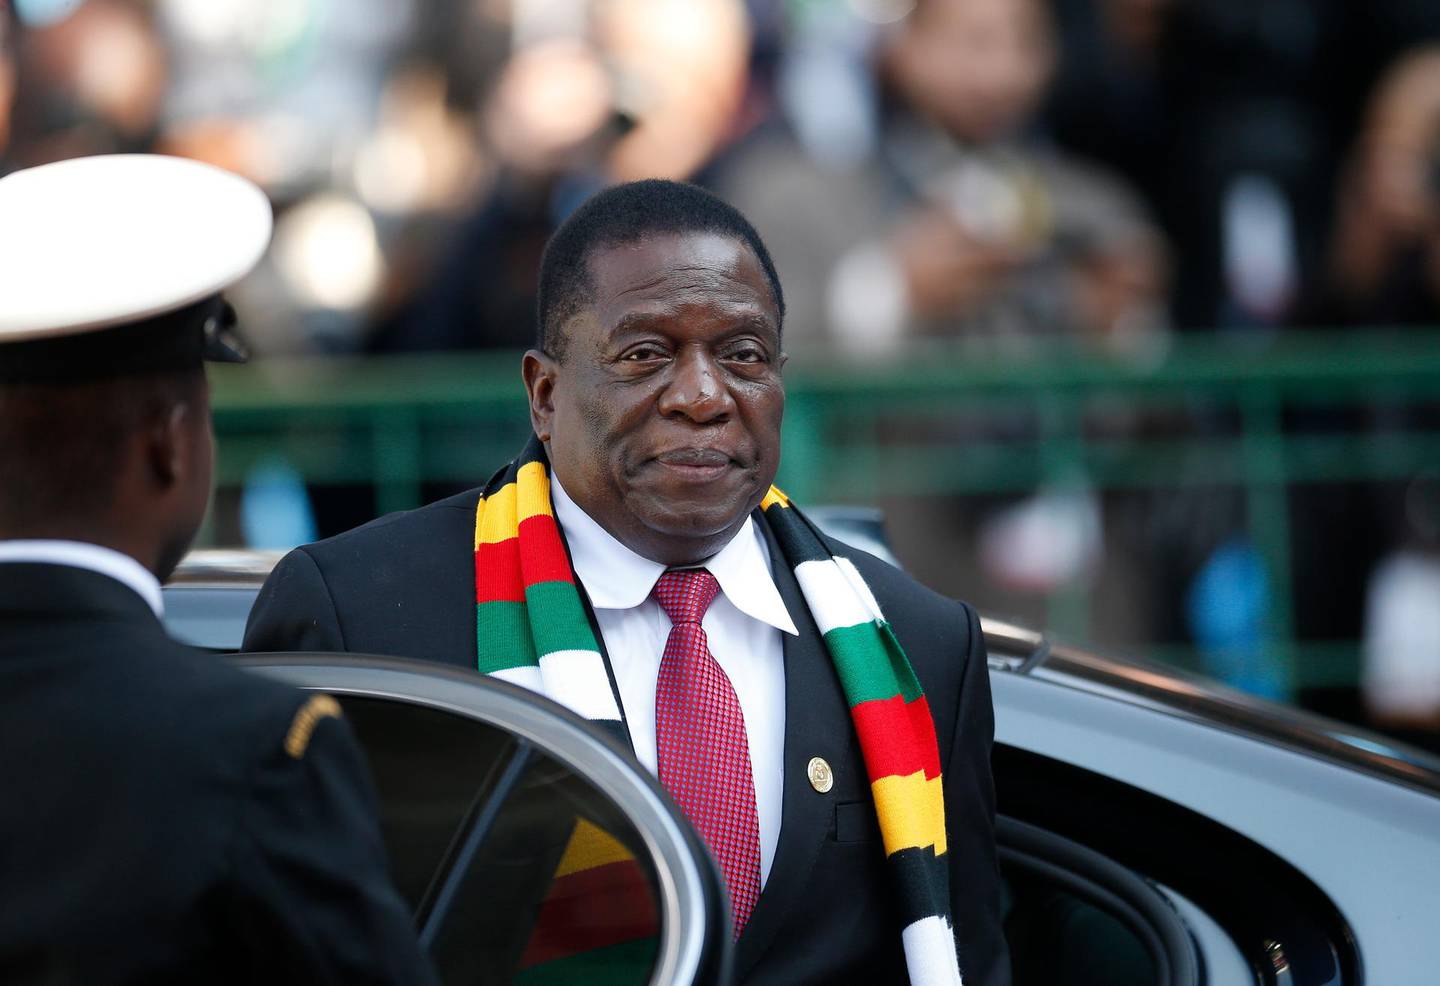 epa07598895 Zimbabwe's President Emmerson Mnangagwa arrives for his inauguration as South African President at Loftus Versfeld stadium in Pretoria, South Africa, 25 May 2019. South African lawmakers elected Cyril Ramaphosa as president following the ruling African National Congress (ANC) party's win earlier this month in the country's general elections.  EPA/Siphiwe Sibeko / POOL